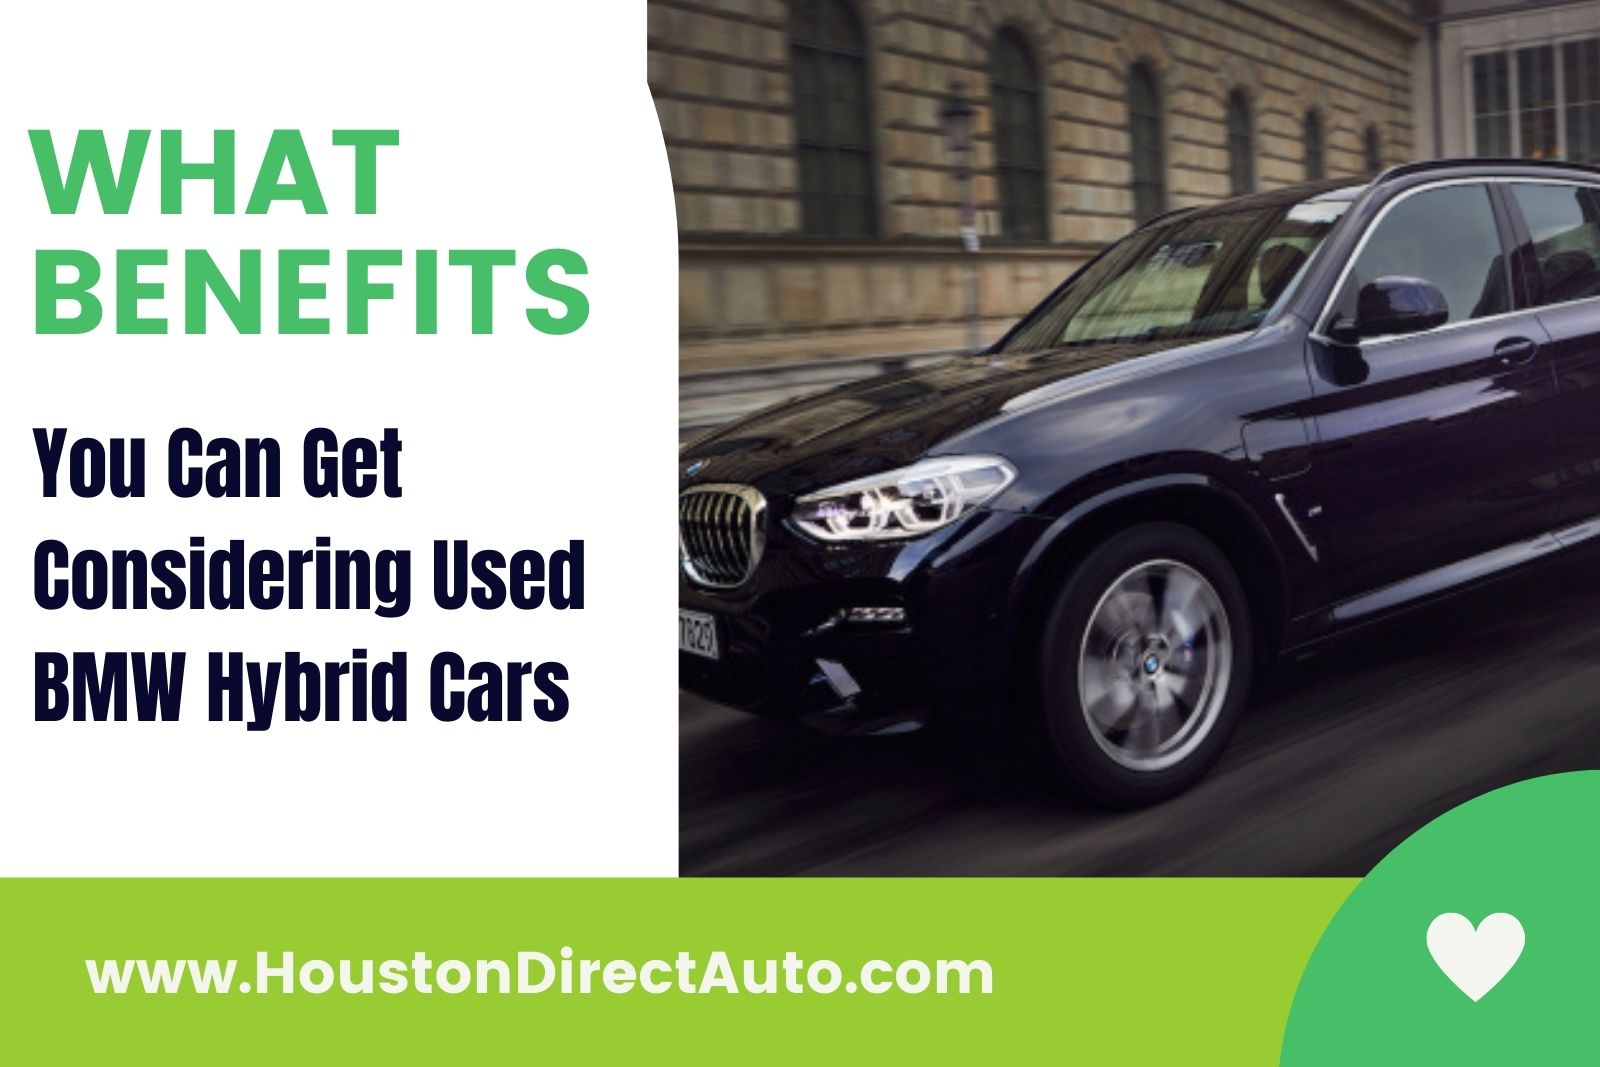 What Benefits You Can Get Considering Used BMW Hybrid Cars